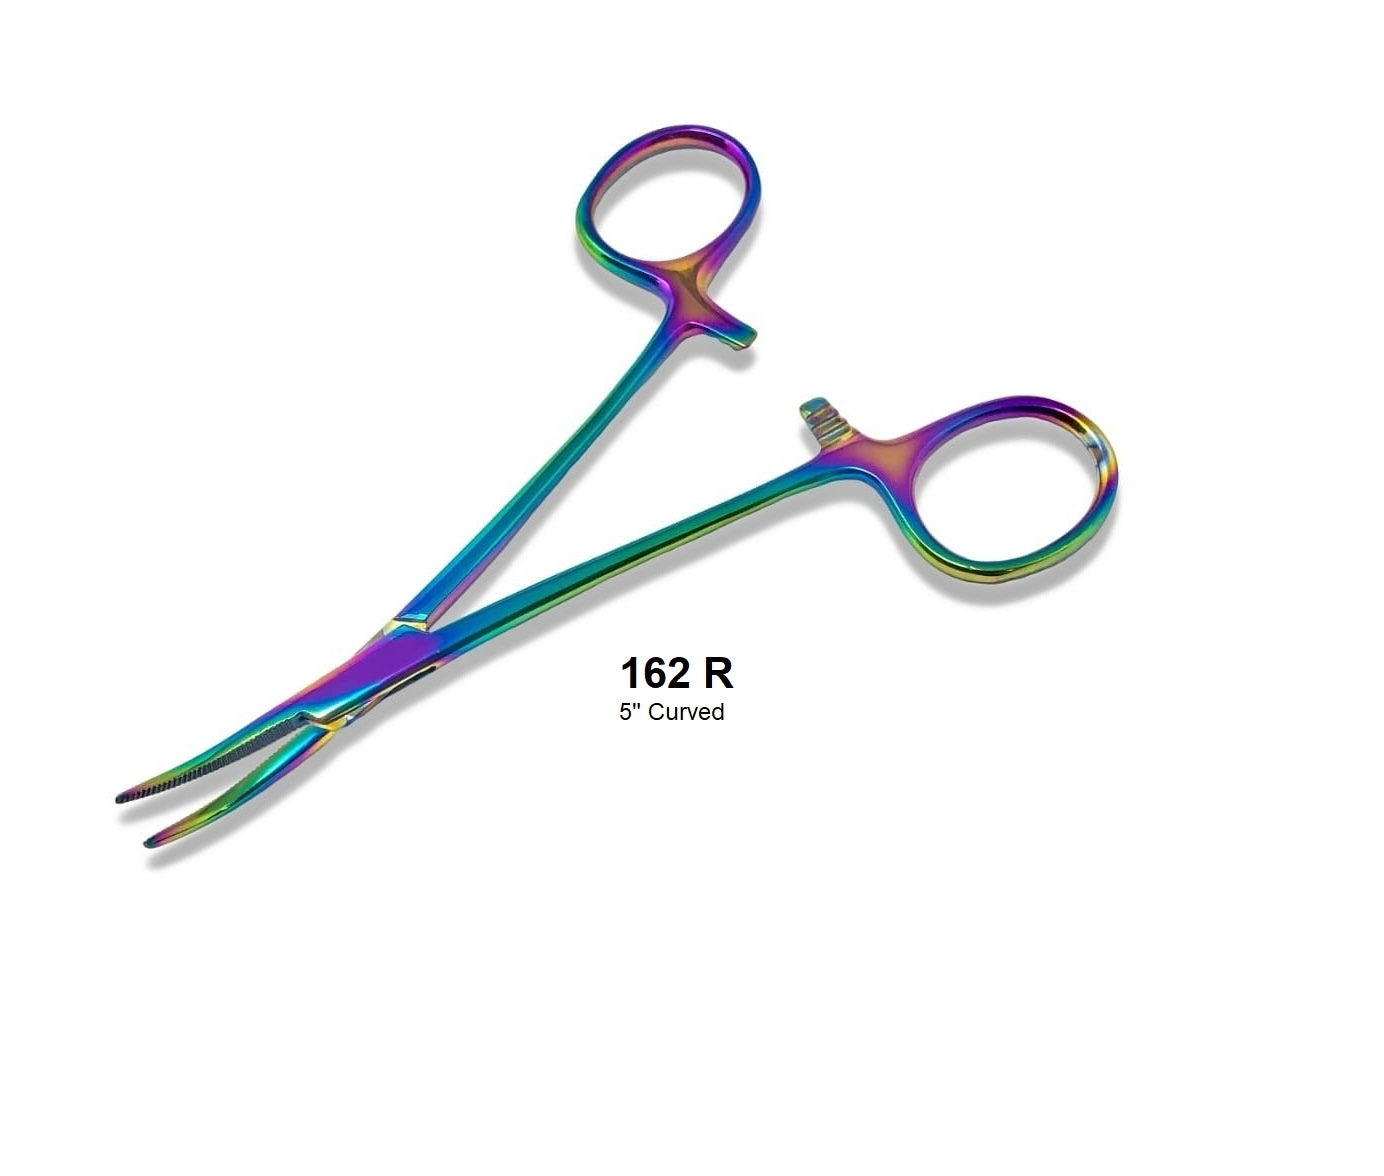 Multicolor Mosquito Hemostat Forceps,curved 162 R